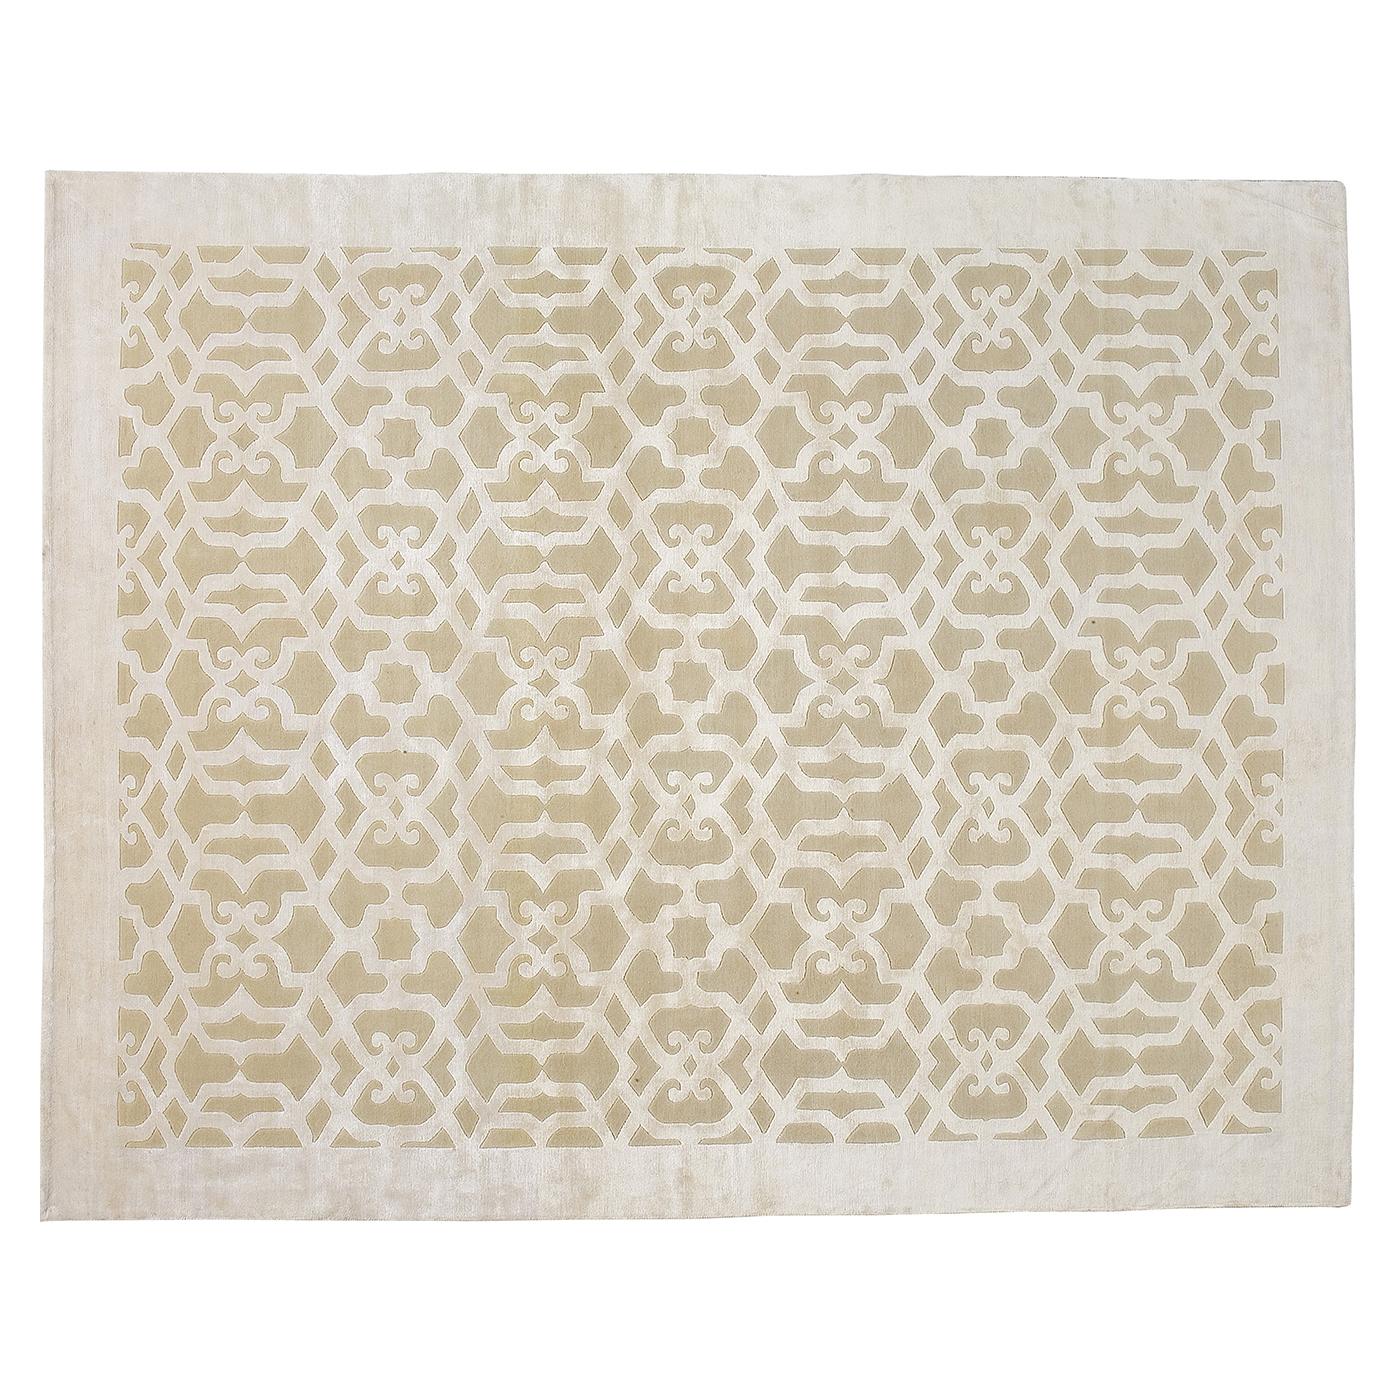 This delightful rug flaunts a delicate design (H .07 cm) inspired by the wrought-iron works that used to adorn noble palaces in Andalusia during the Arabian domination. Defly hand-knotted by Nepalese master weavers using 50% silk and 50% Himalayan